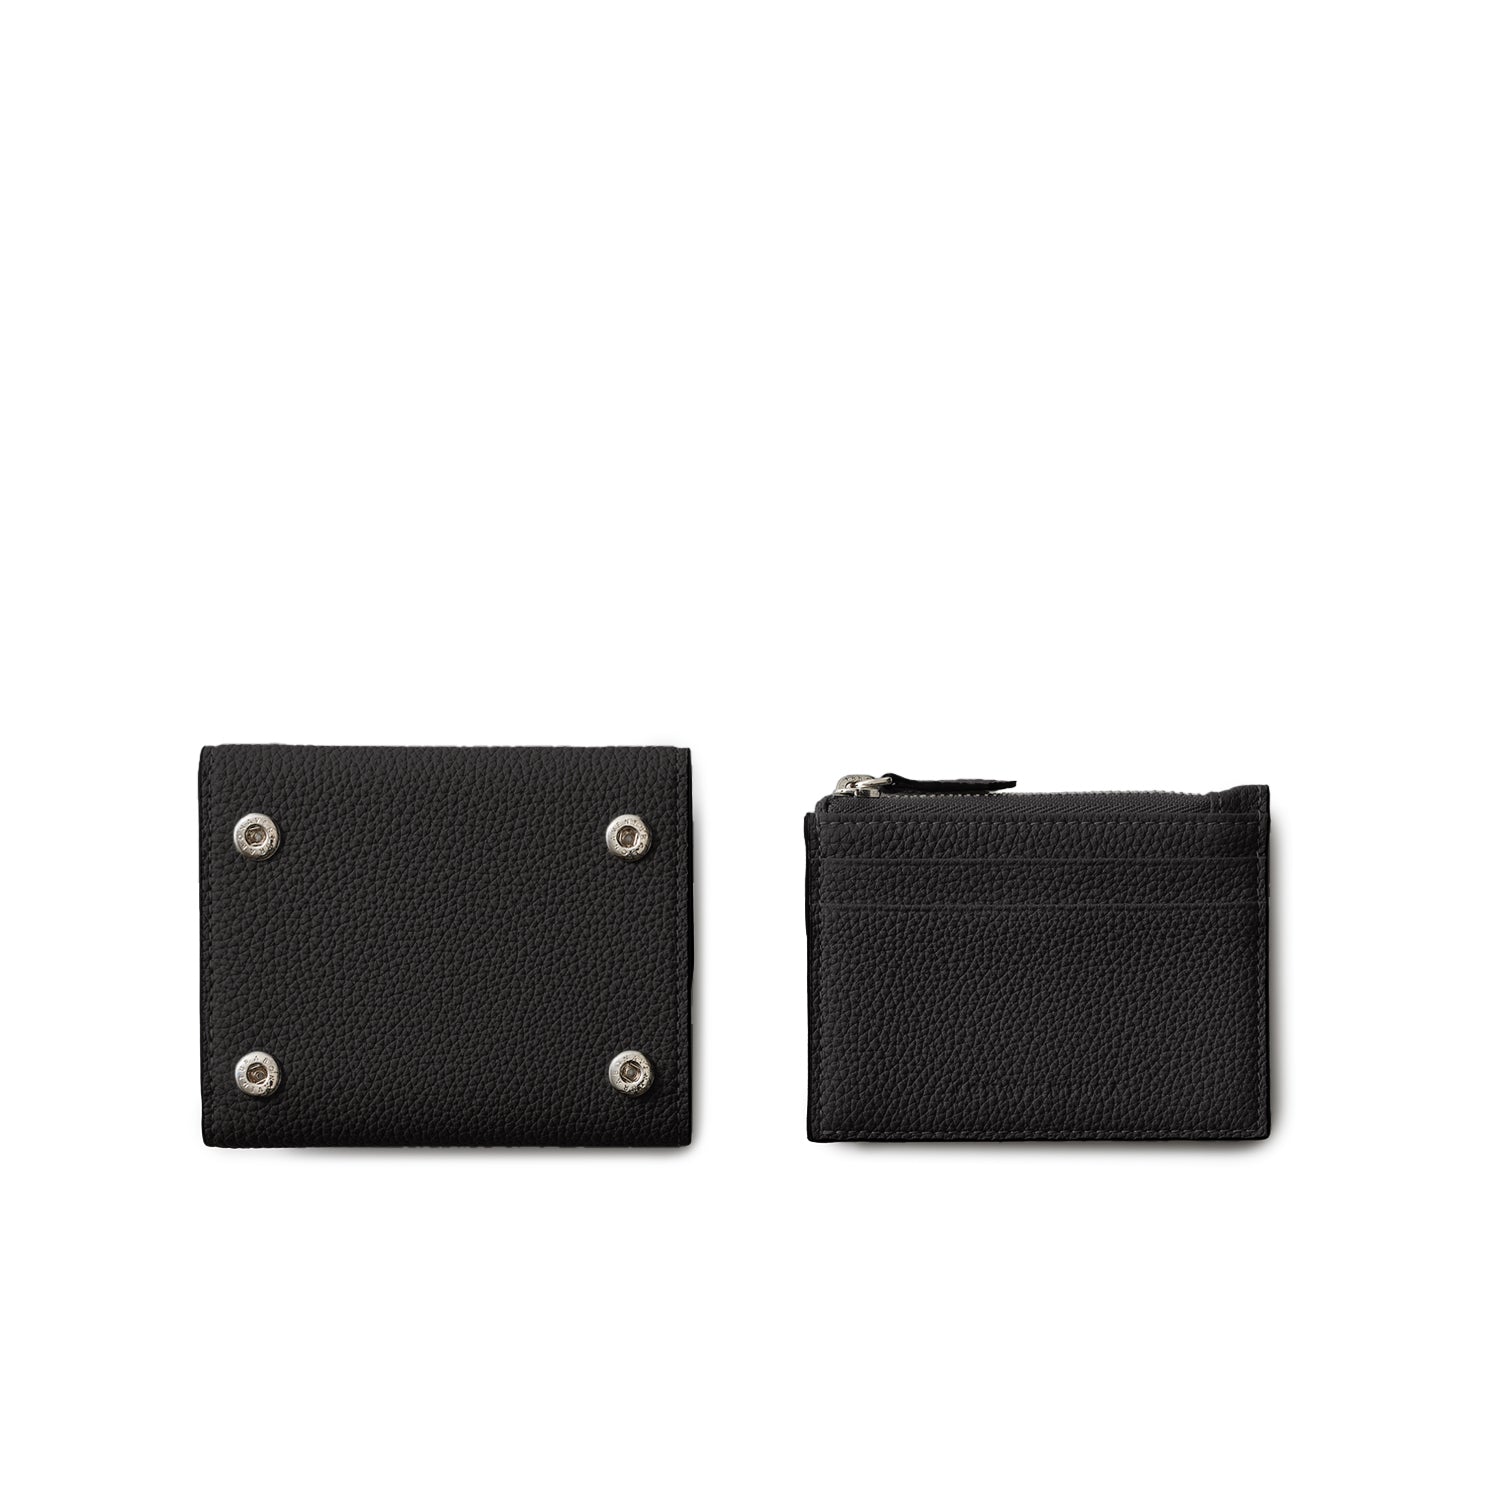 Beatrice Trifold Wallet in Shrink Leather